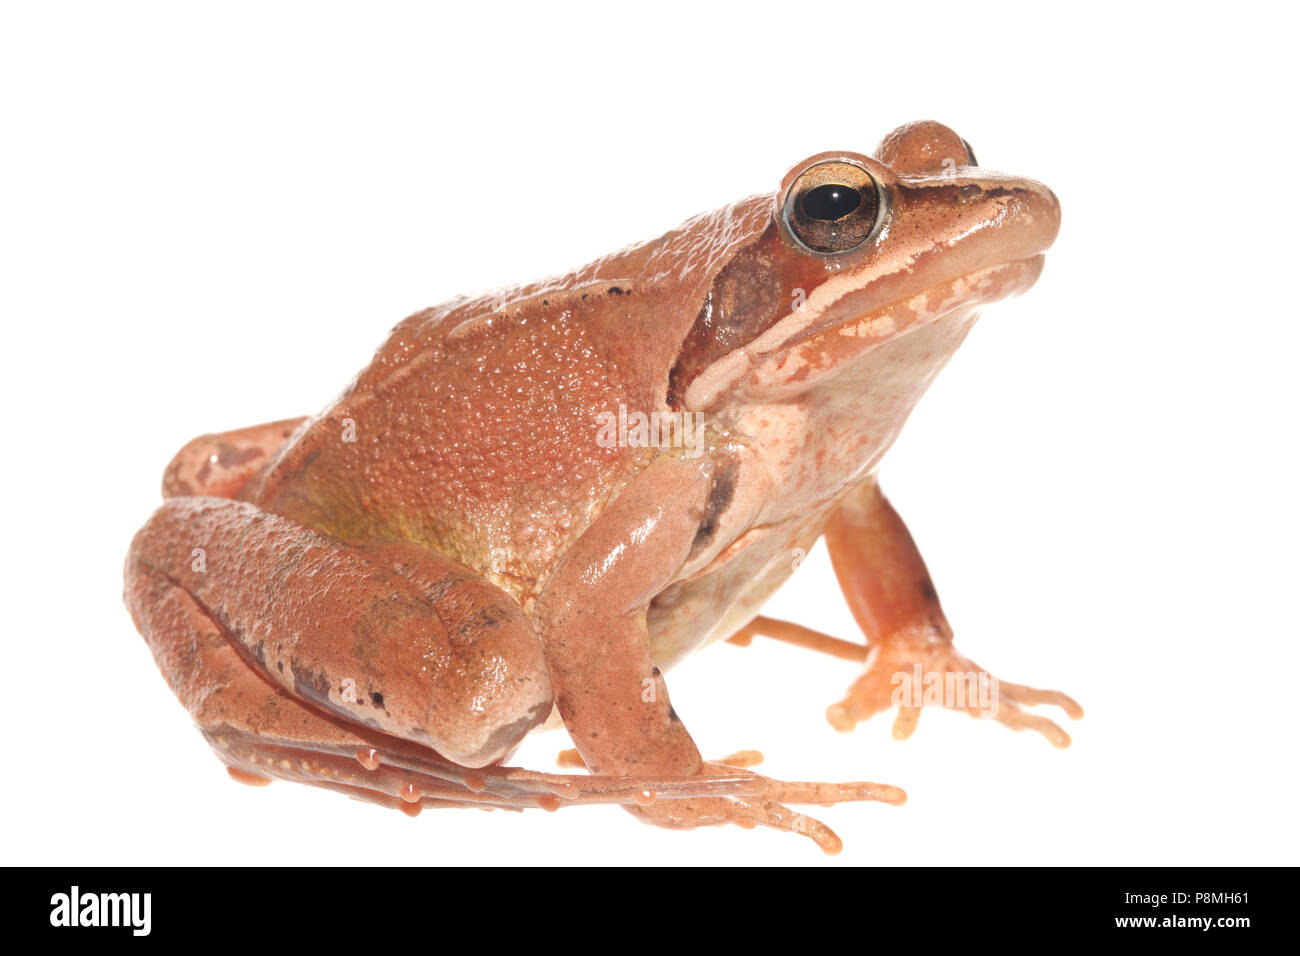 agile frog isolated against a white background Stock Photo